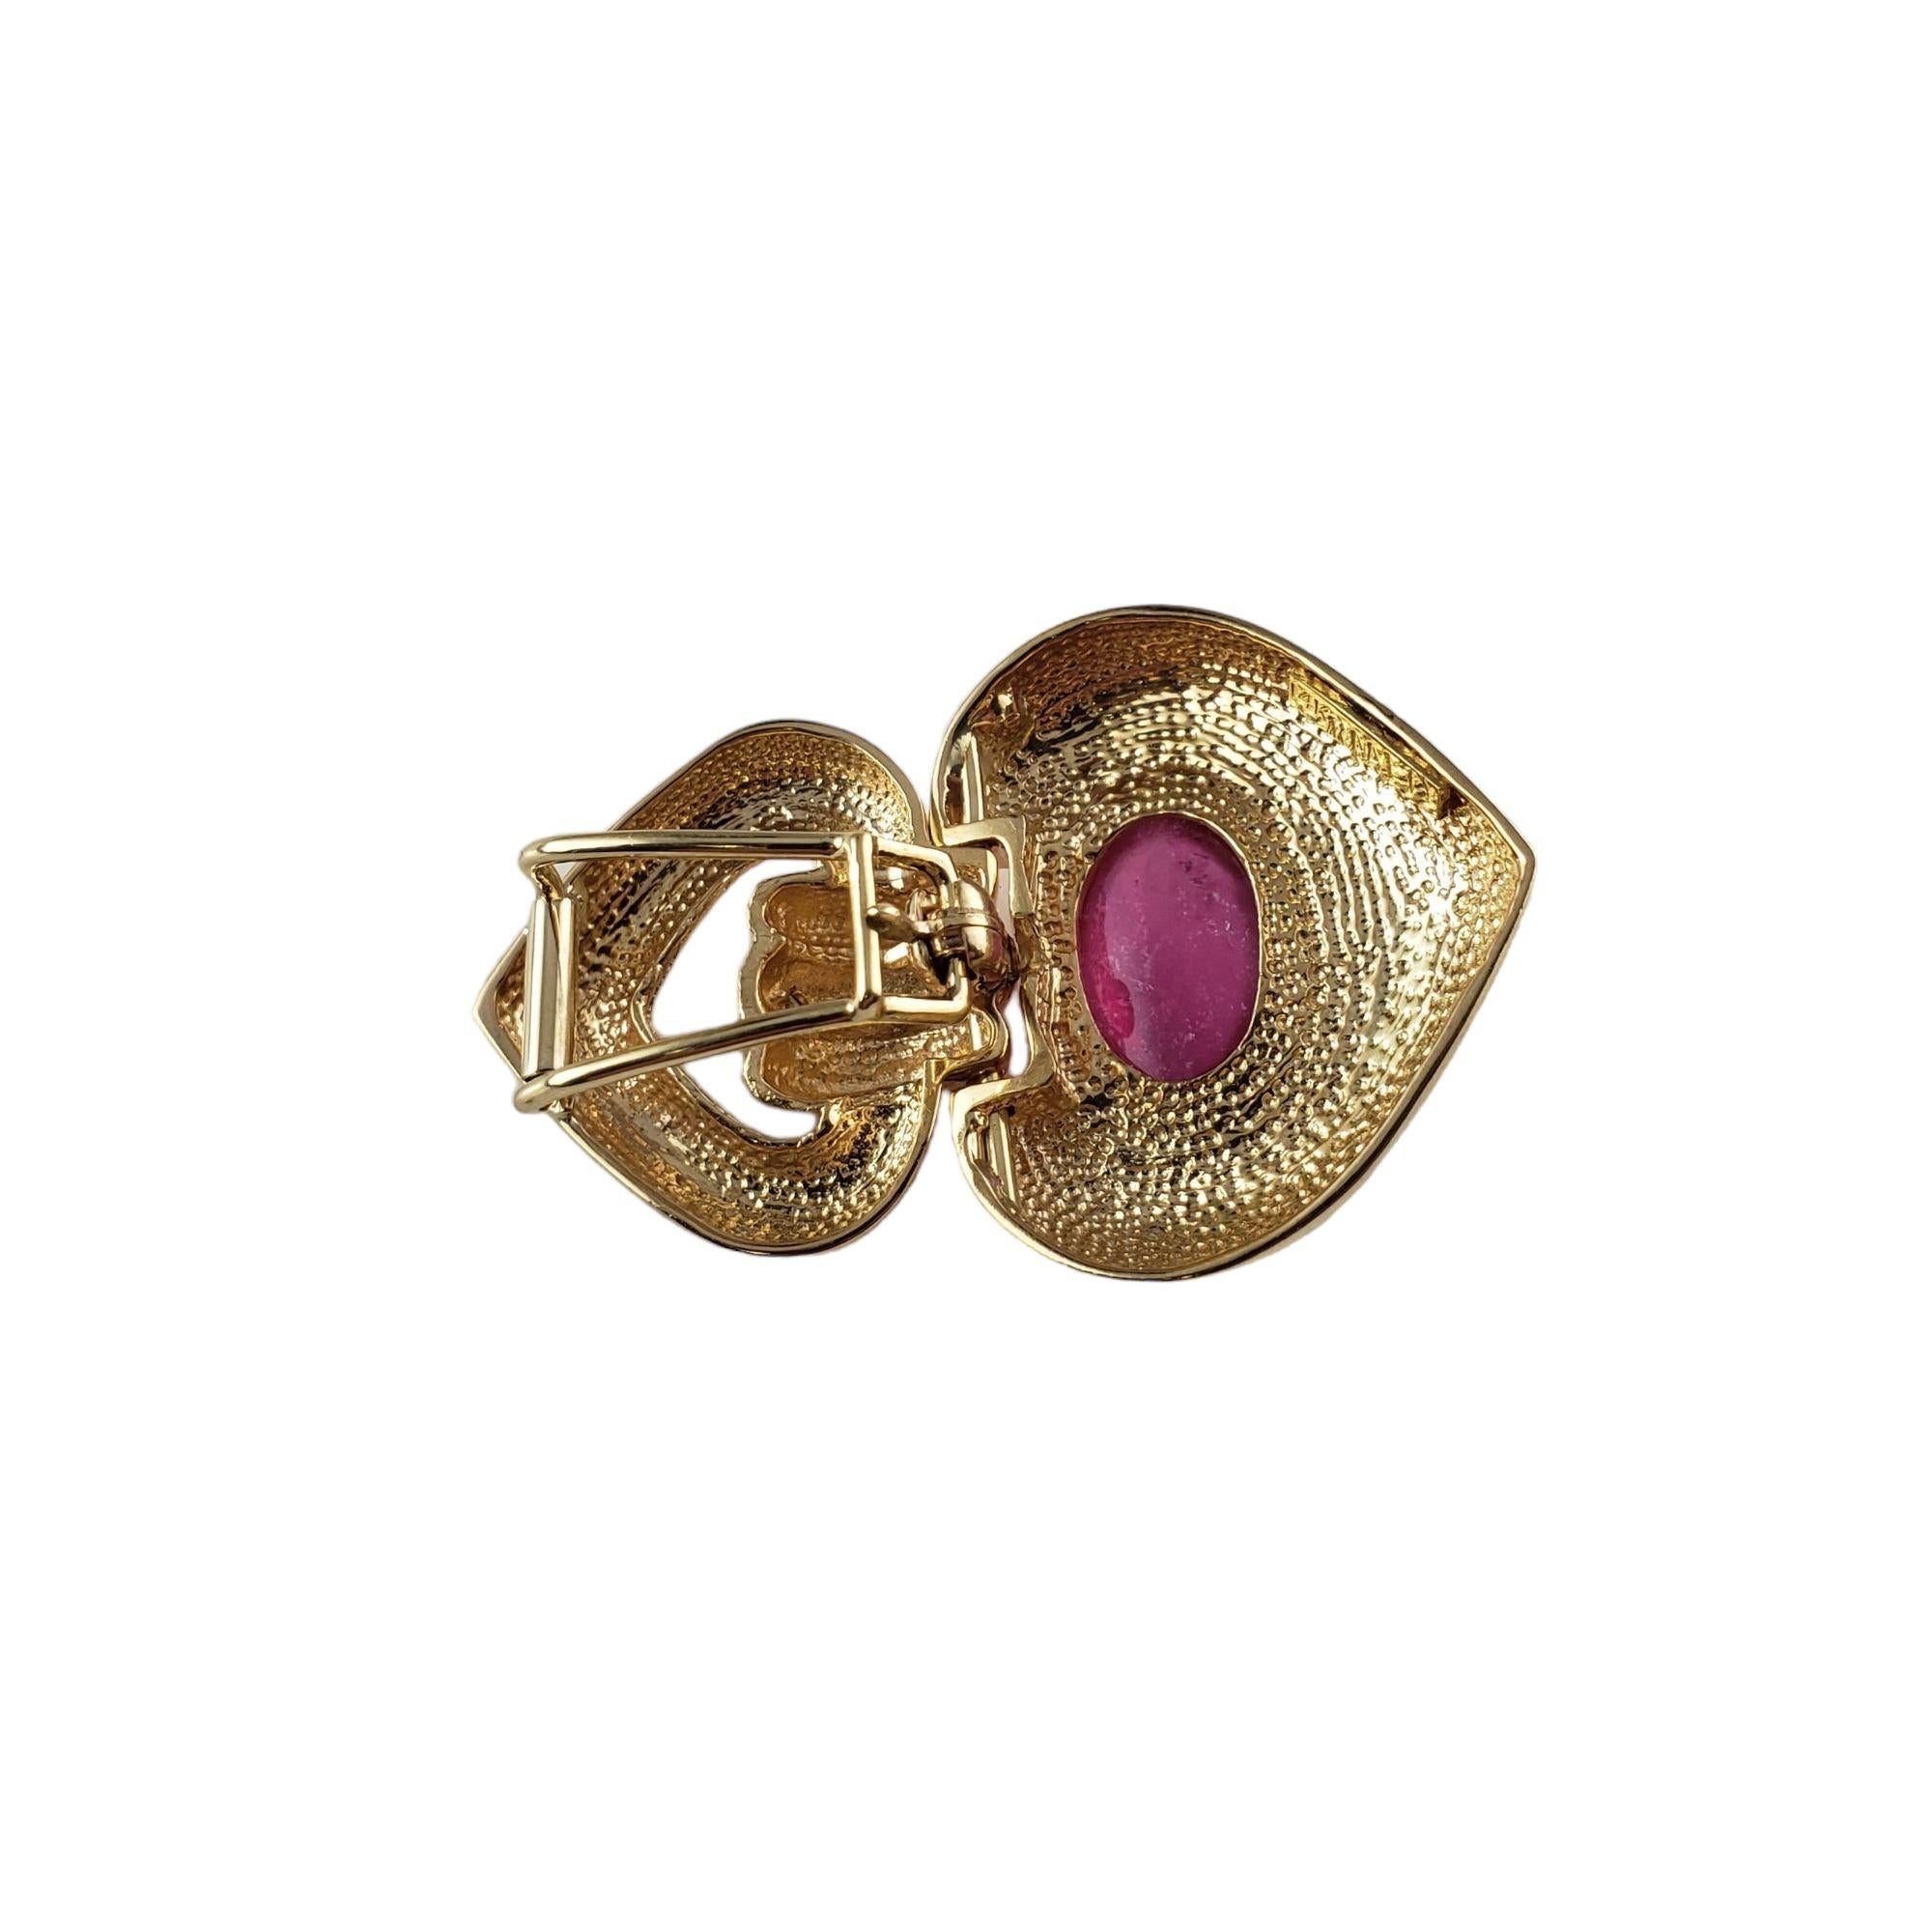 Vintage 14 Karat Yellow Gold Pink Tourmaline and Diamond Pendant JAGi Certified-

This stunning pendant features one oval cabochon pink tourmaline (14 mm x 10 mm) and four round brilliant cut diamonds set in beautifully detailed 14K yellow